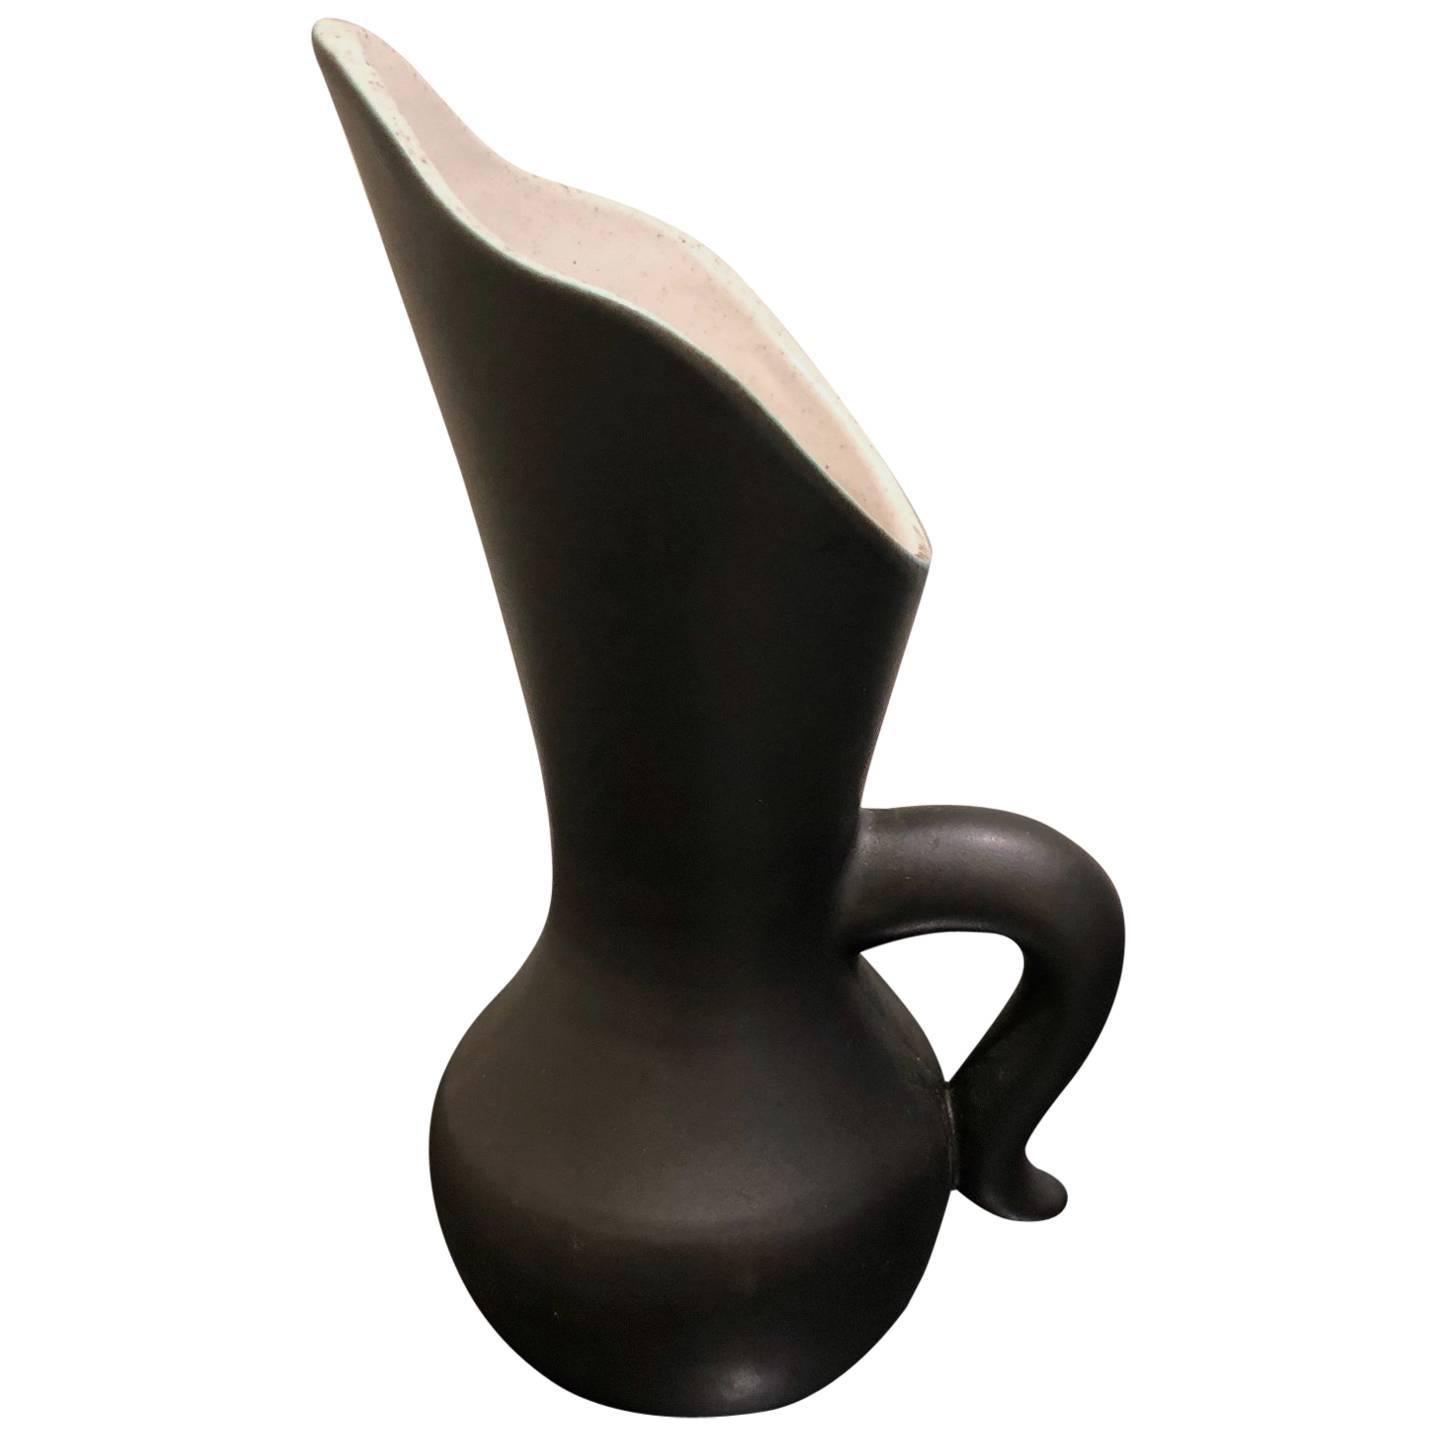 Ceramic Black and White Pitcher by Pol Chambost, 1950s